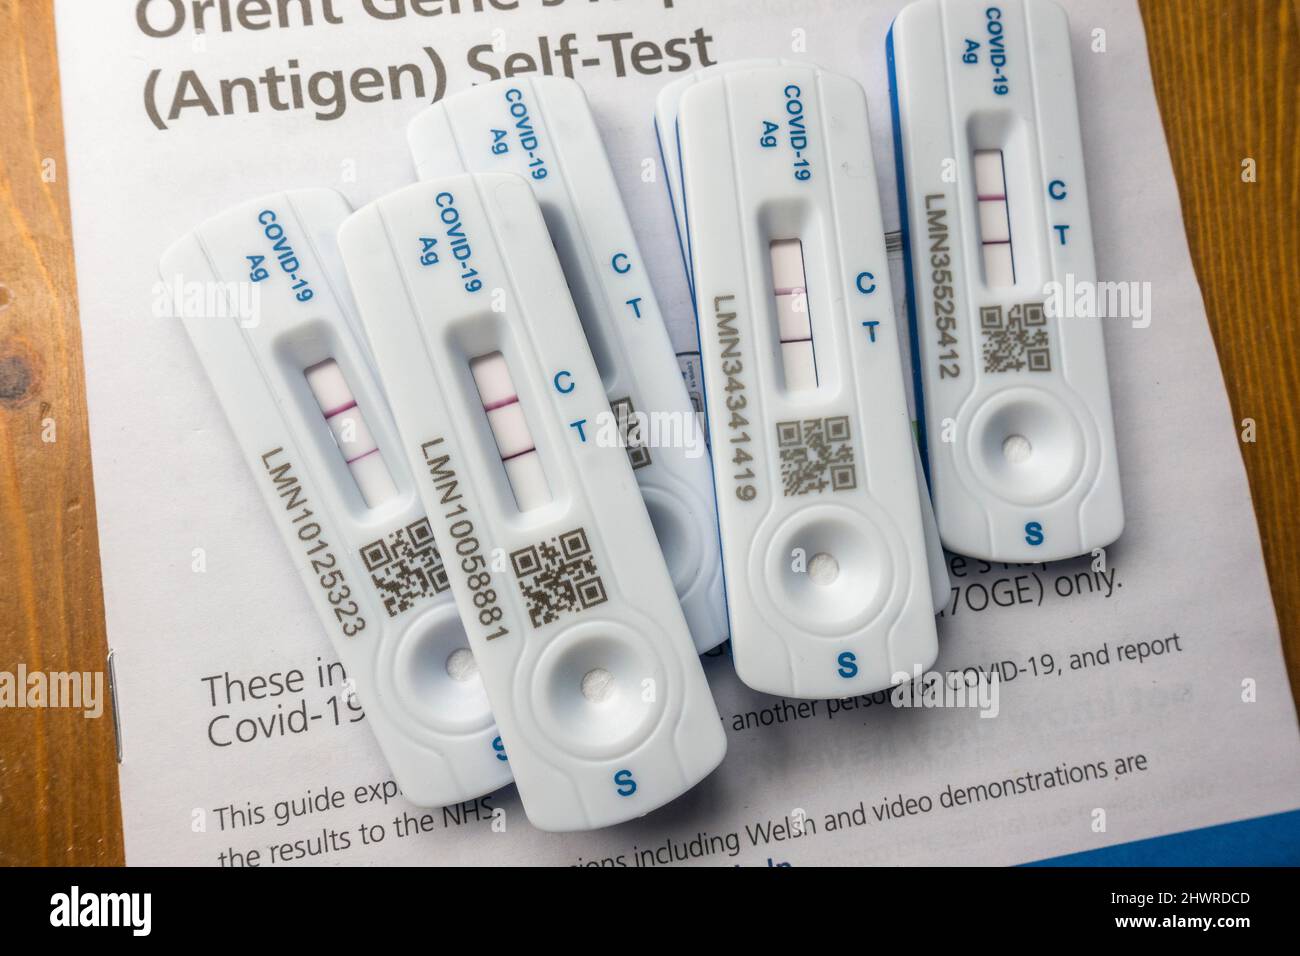 Several genuine Covid-19 positive test kits using Orient Gene lateral flow test kit in London, UK. Stock Photo